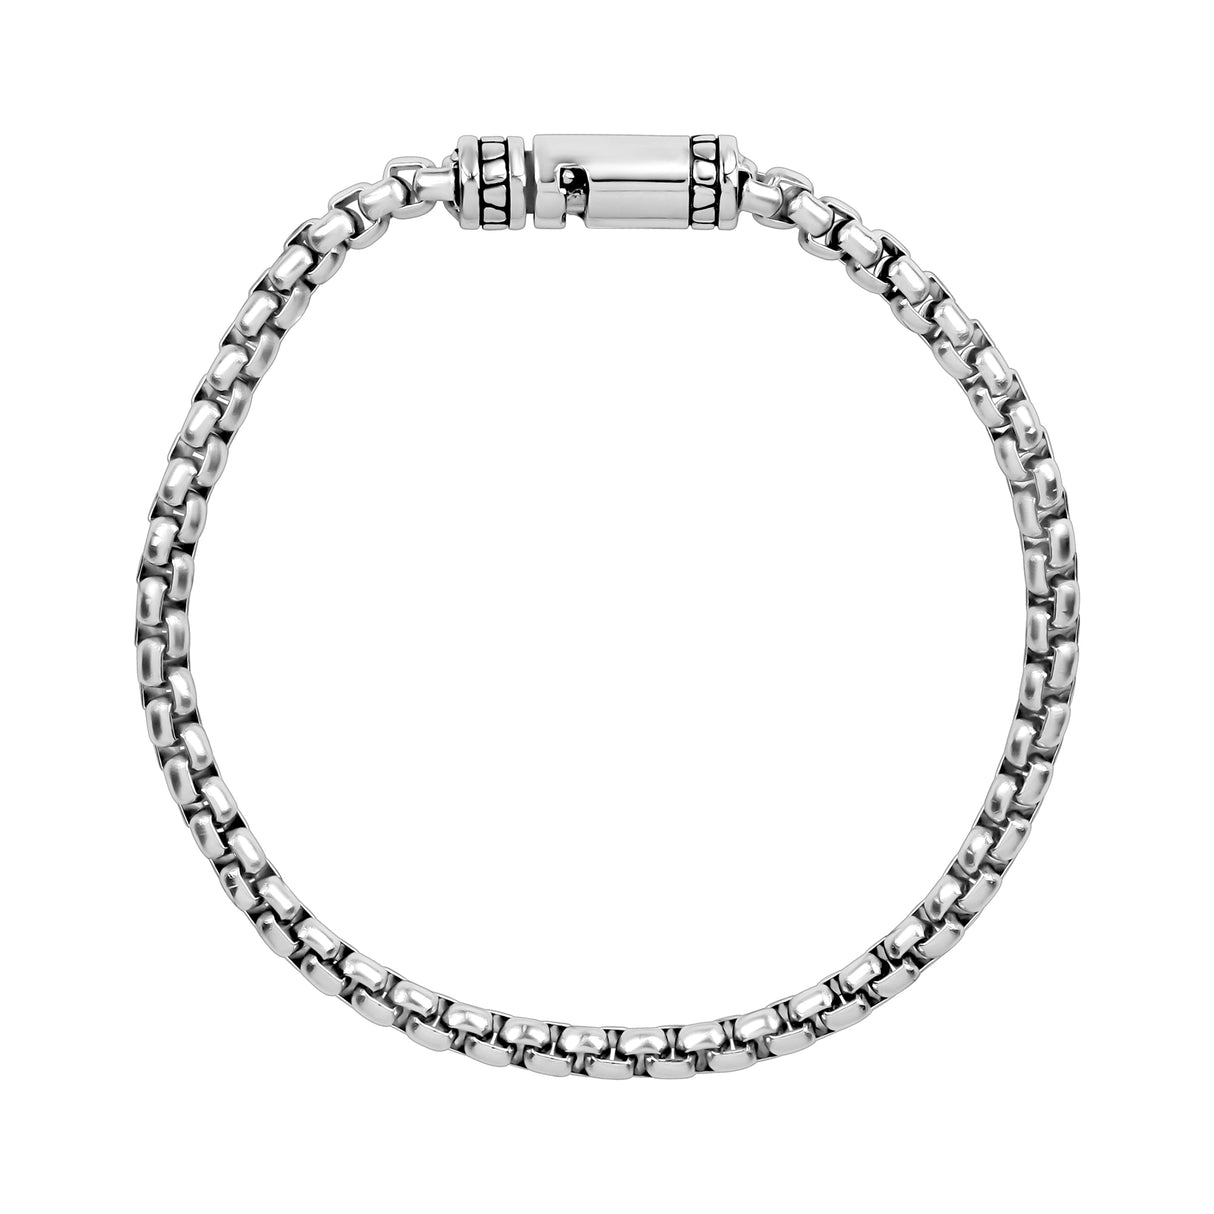 Detailed Round Box Link Bracelet | 4mm - メンズスチールブレスレット - The Steel Shop